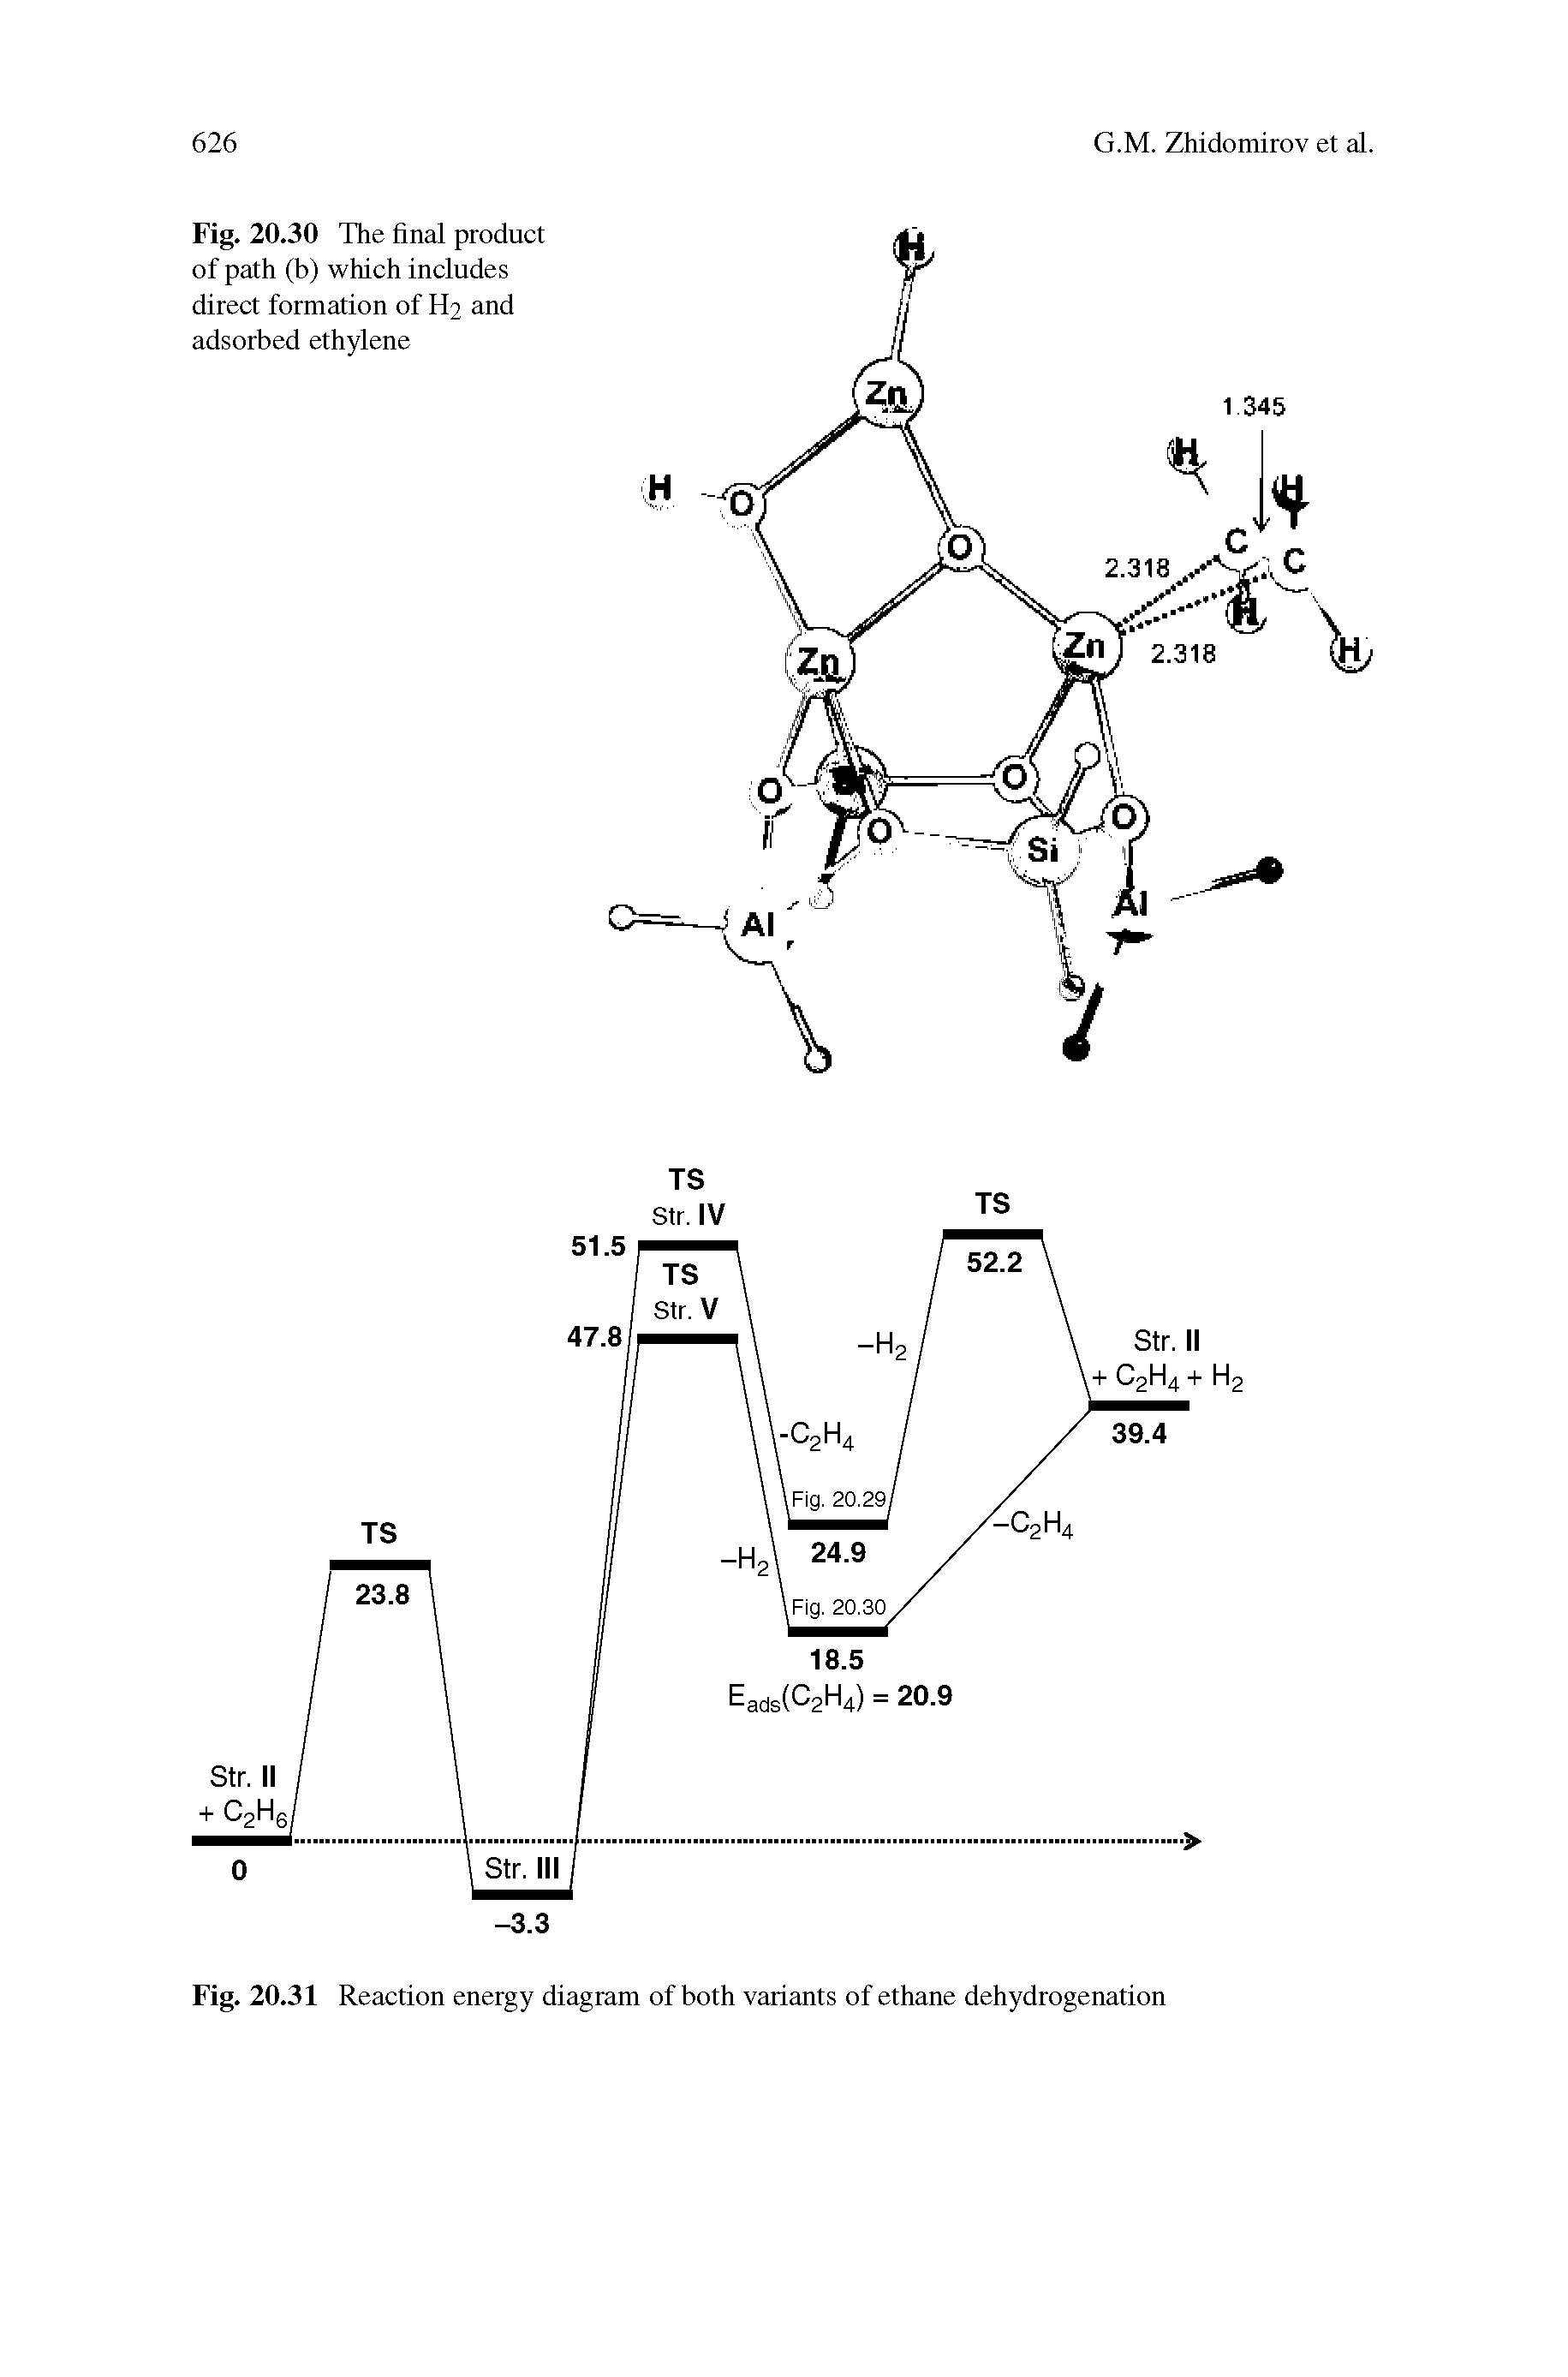 Fig. 20.31 Reaction energy diagram of both variants of ethane dehydrogenation...